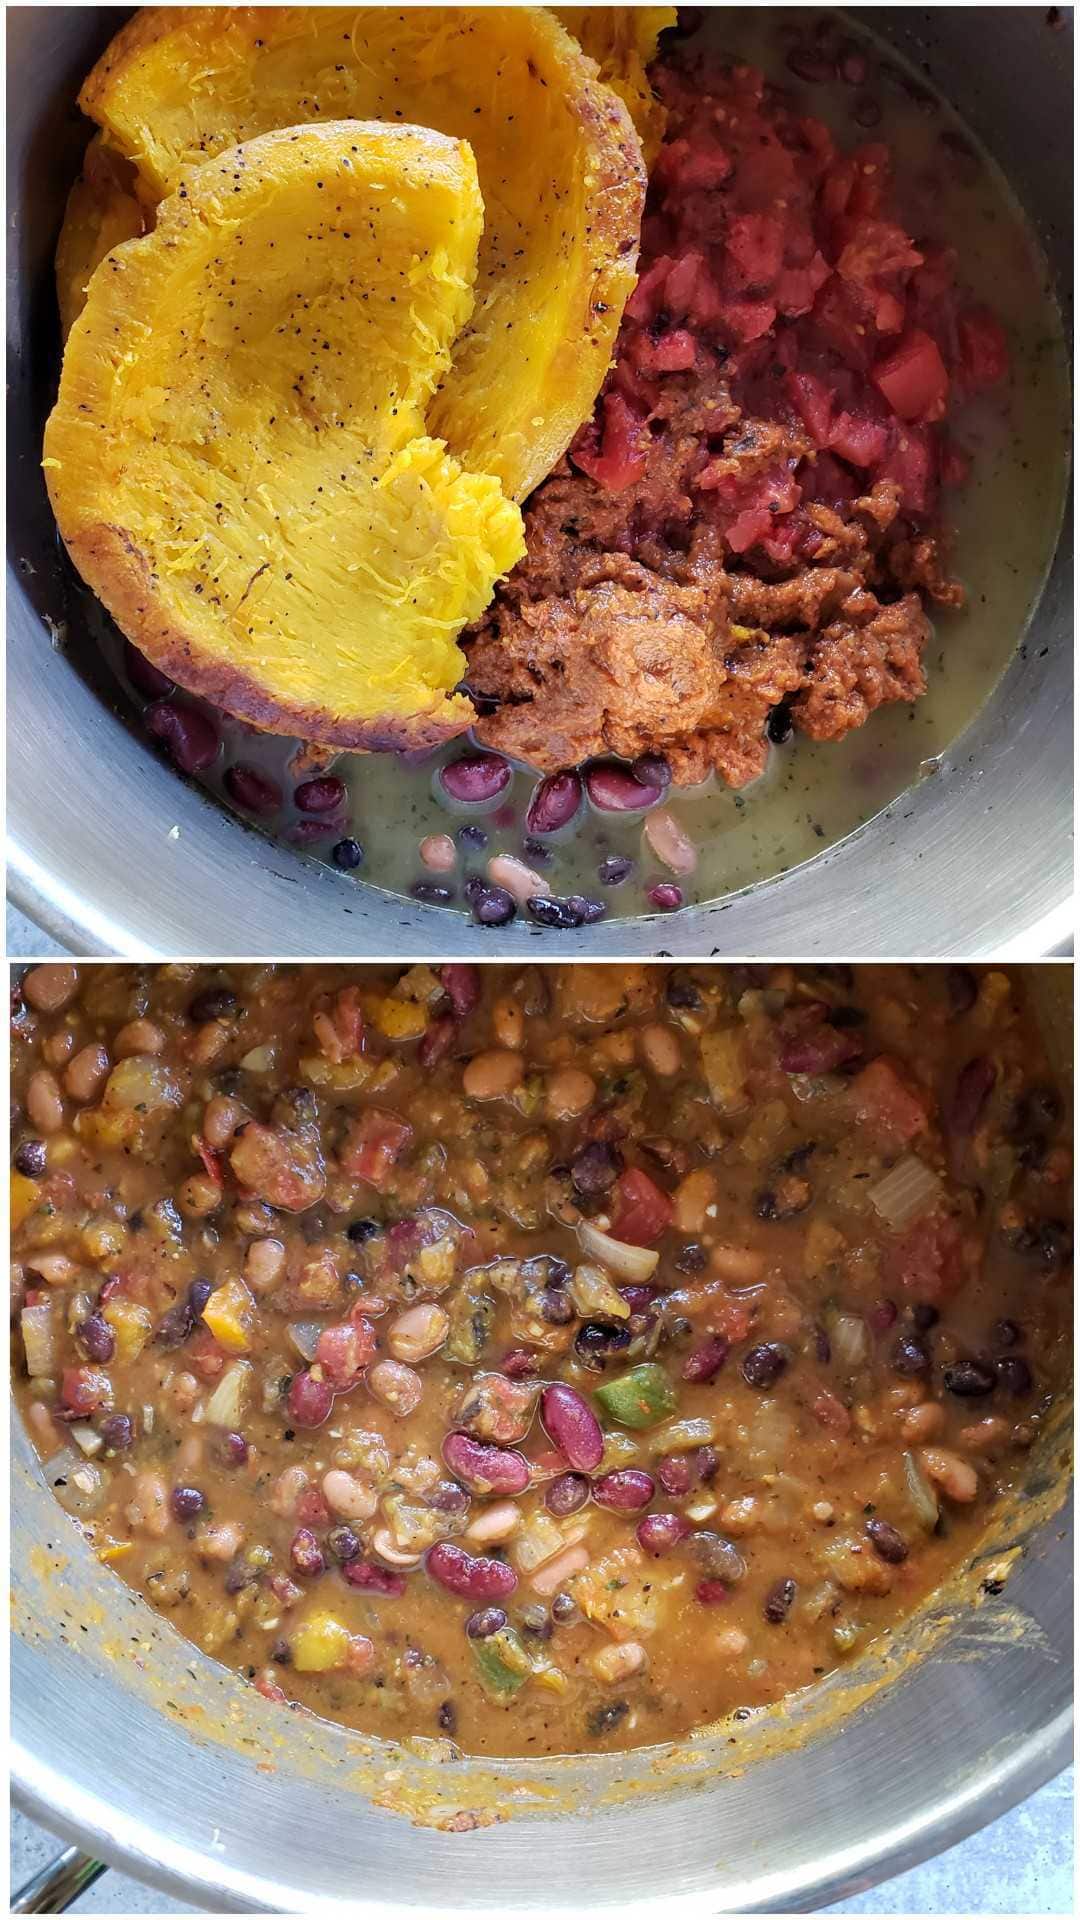 A two part image collage, the first image shows the chili after the broth, tomatoes, beans, and pumpkin have been added to the top of the original sauté. The second image shows the chili once it has been stirred together and mixed well. You can see each type of bean, onions, peppers, tomato and parts of pumpkin. 